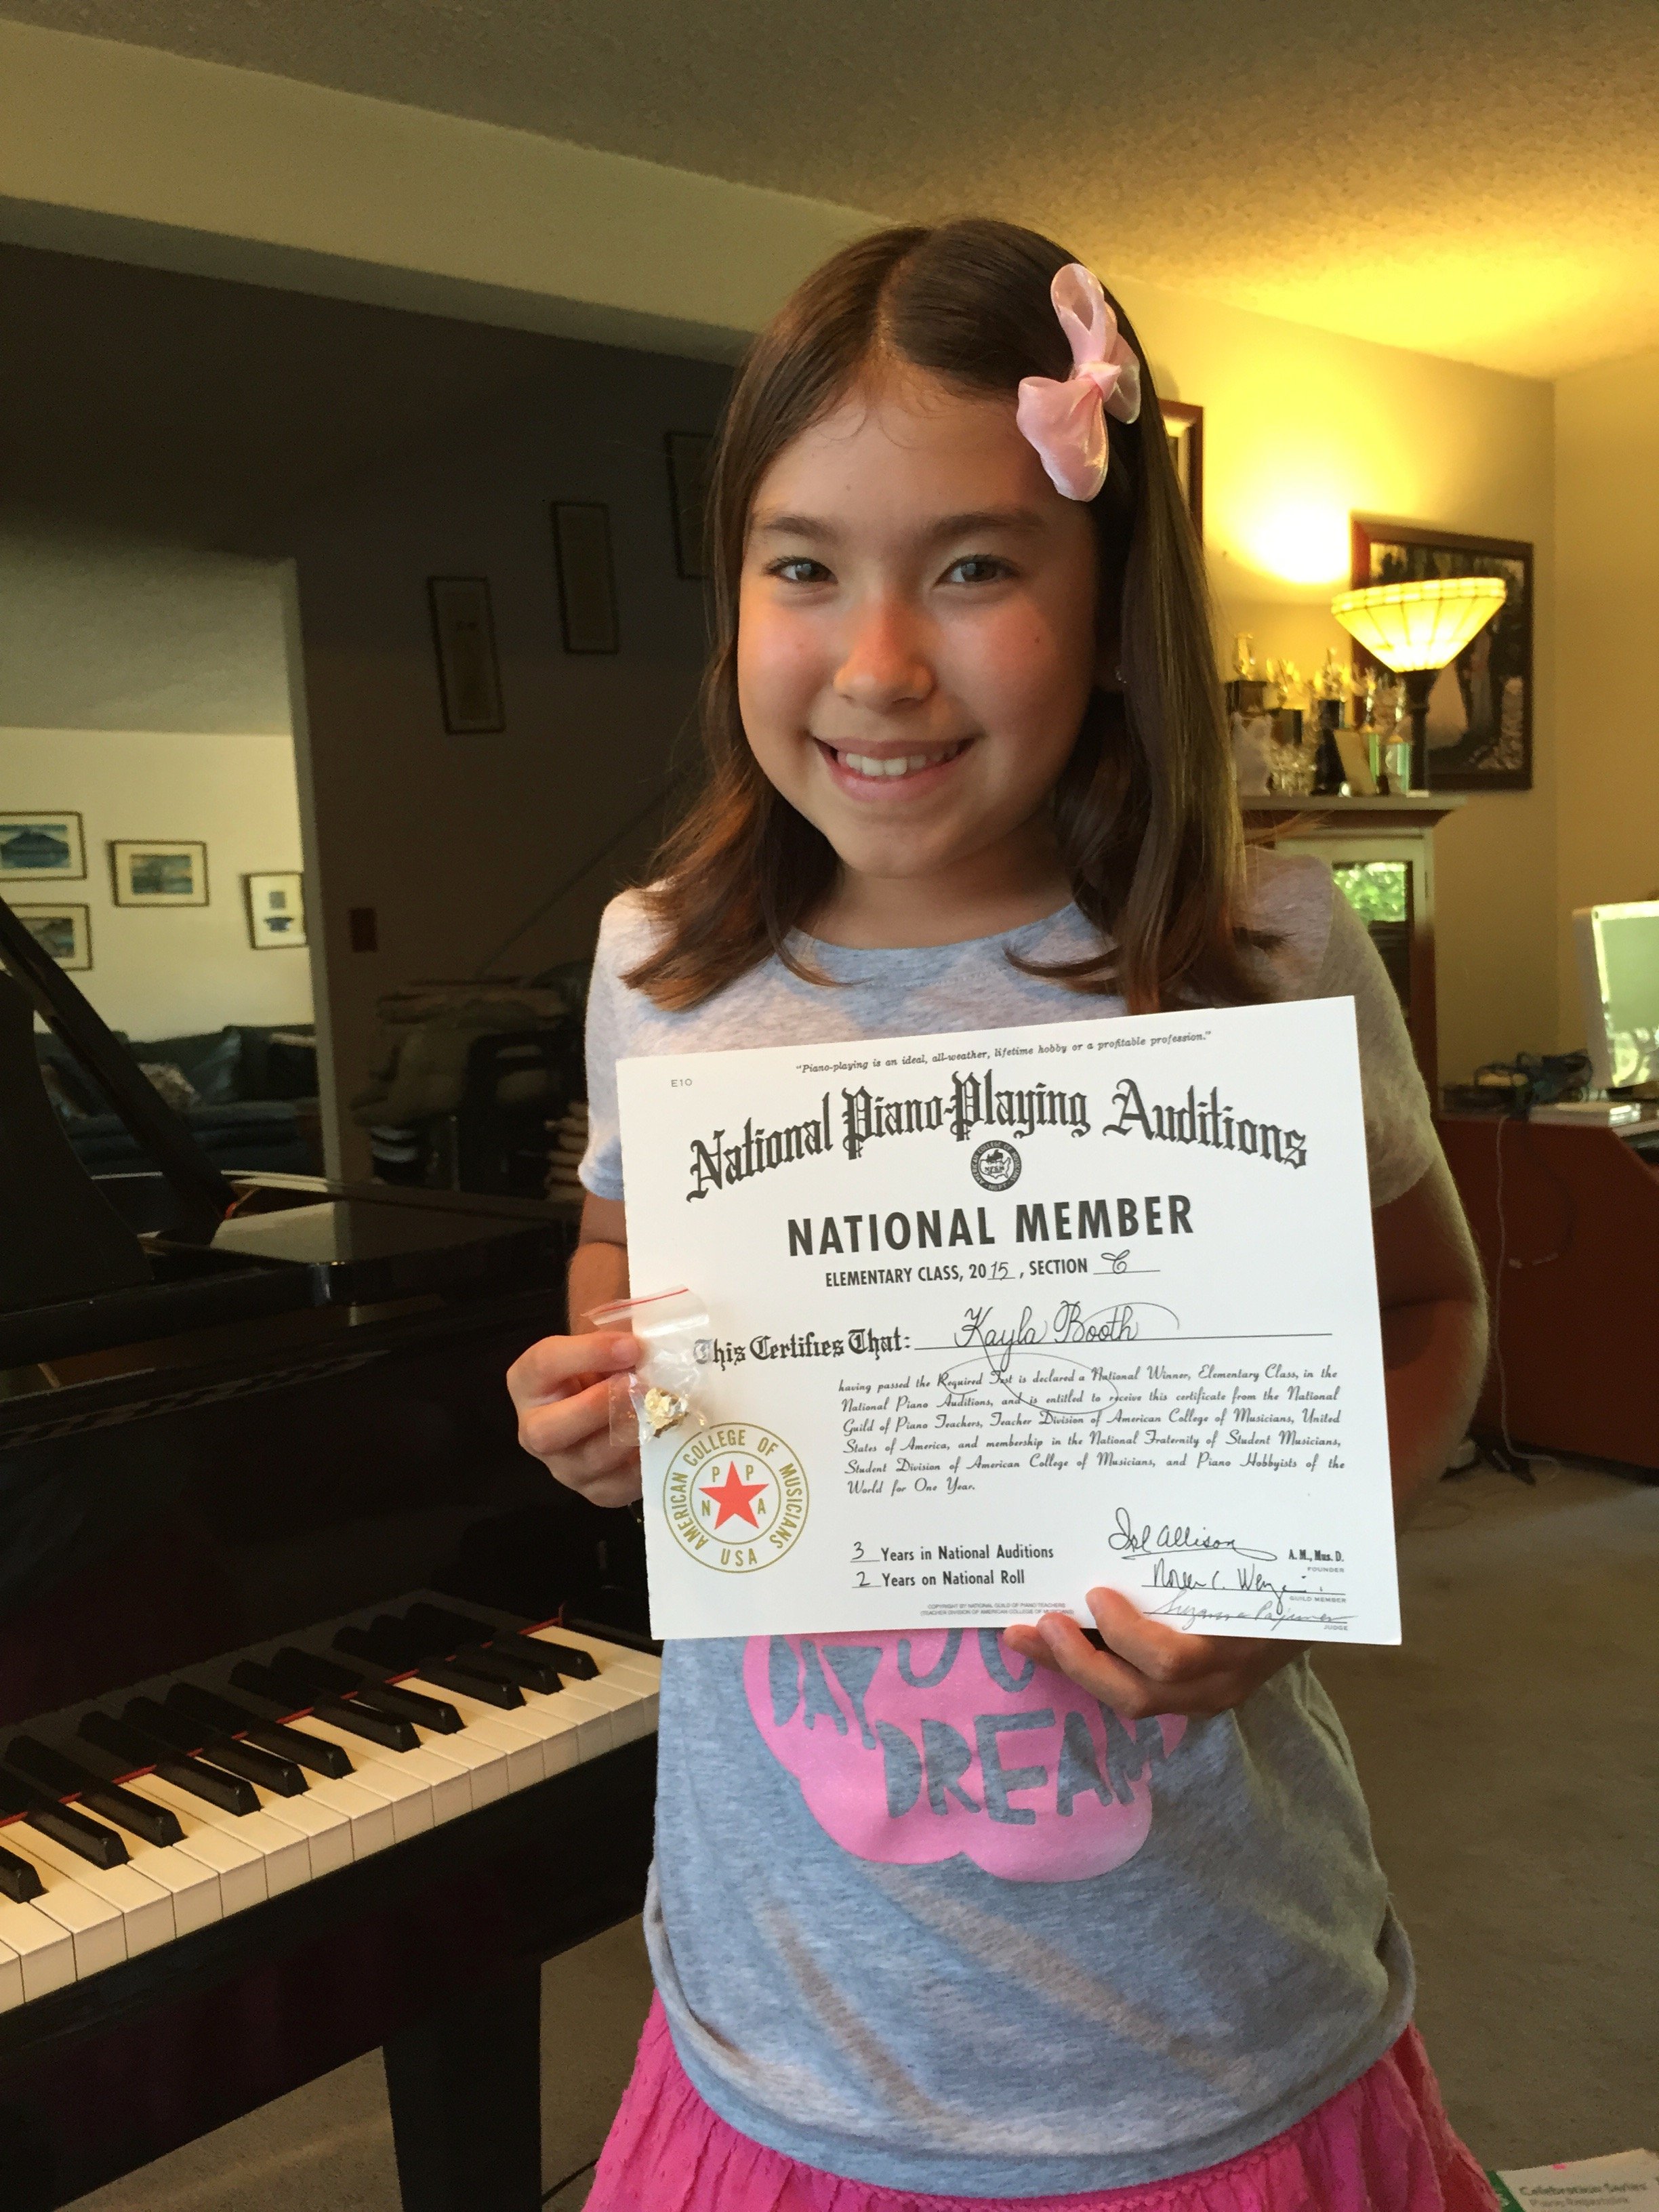 Get lifetime piano lessons online for just $150